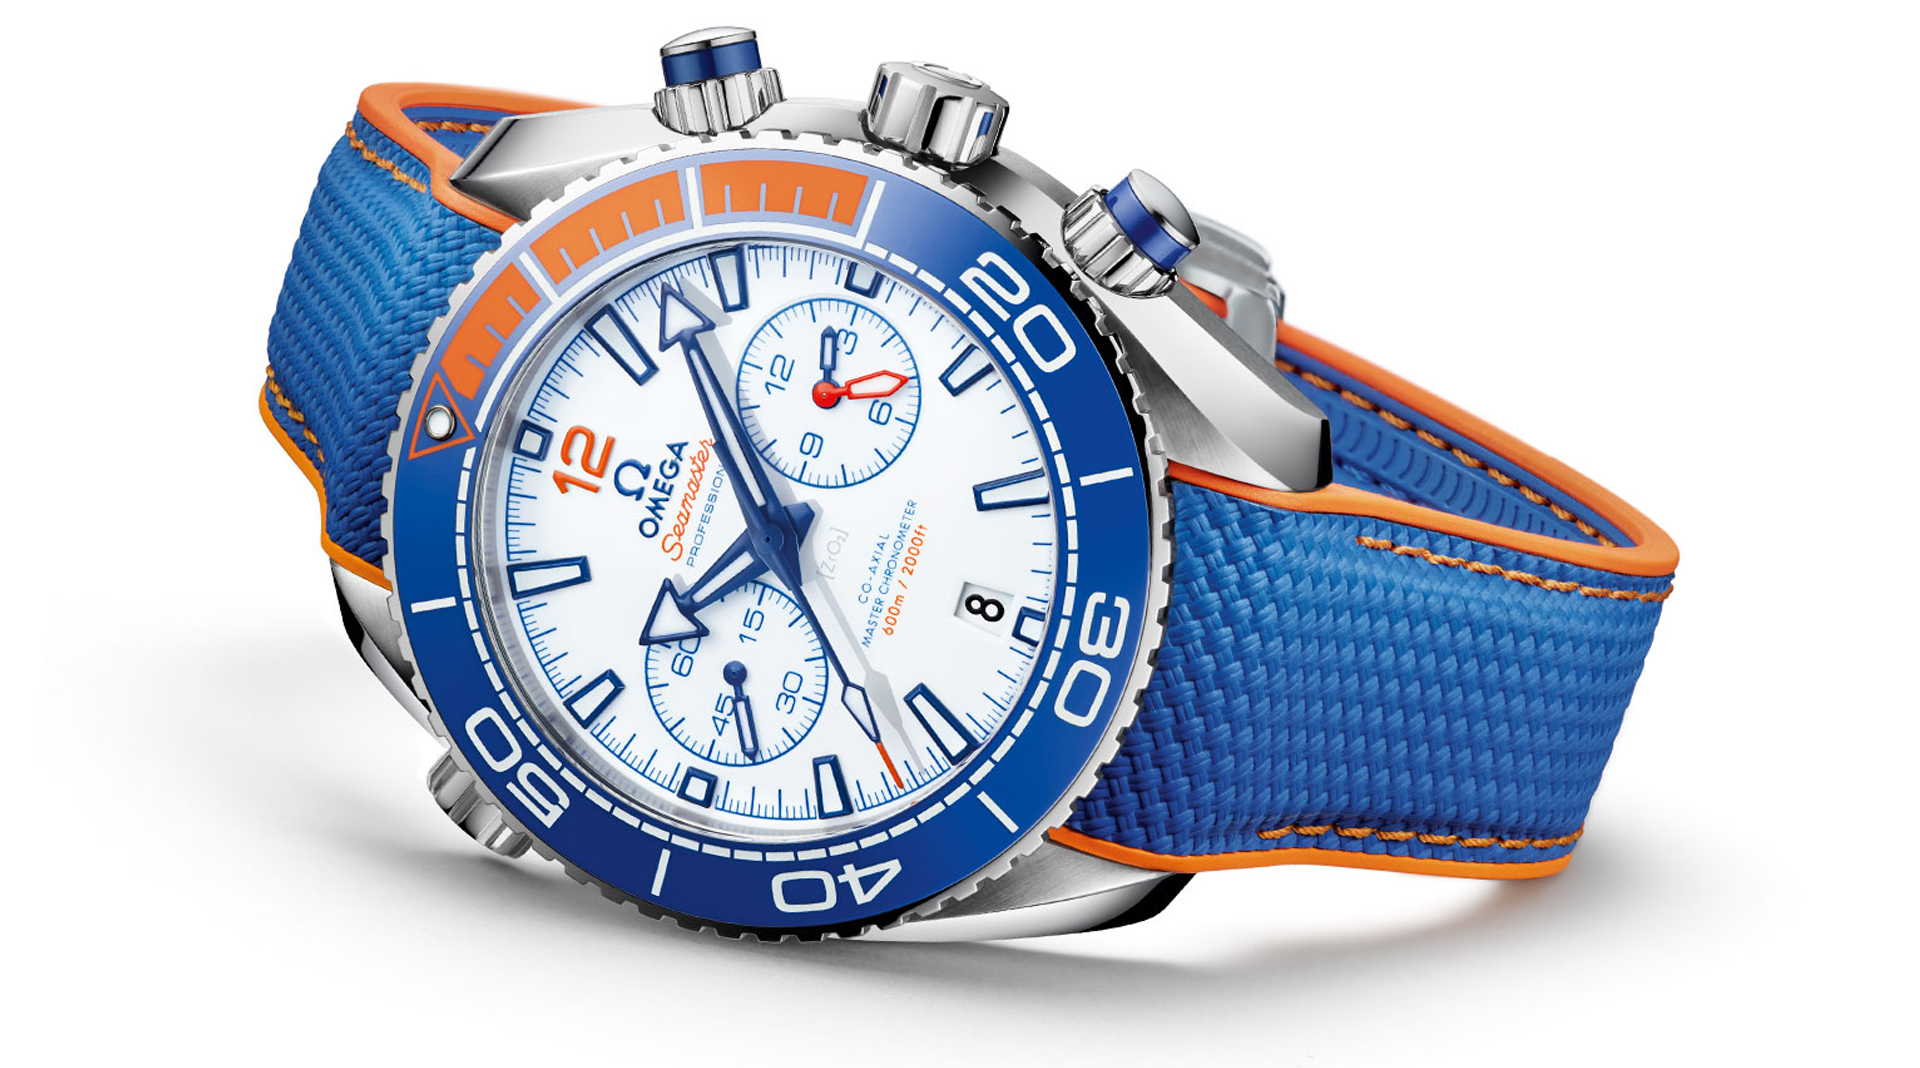 Omega Seamaster Planet Ocean Michael Phelps Limited Edition 215.32.46.51.04.001 side